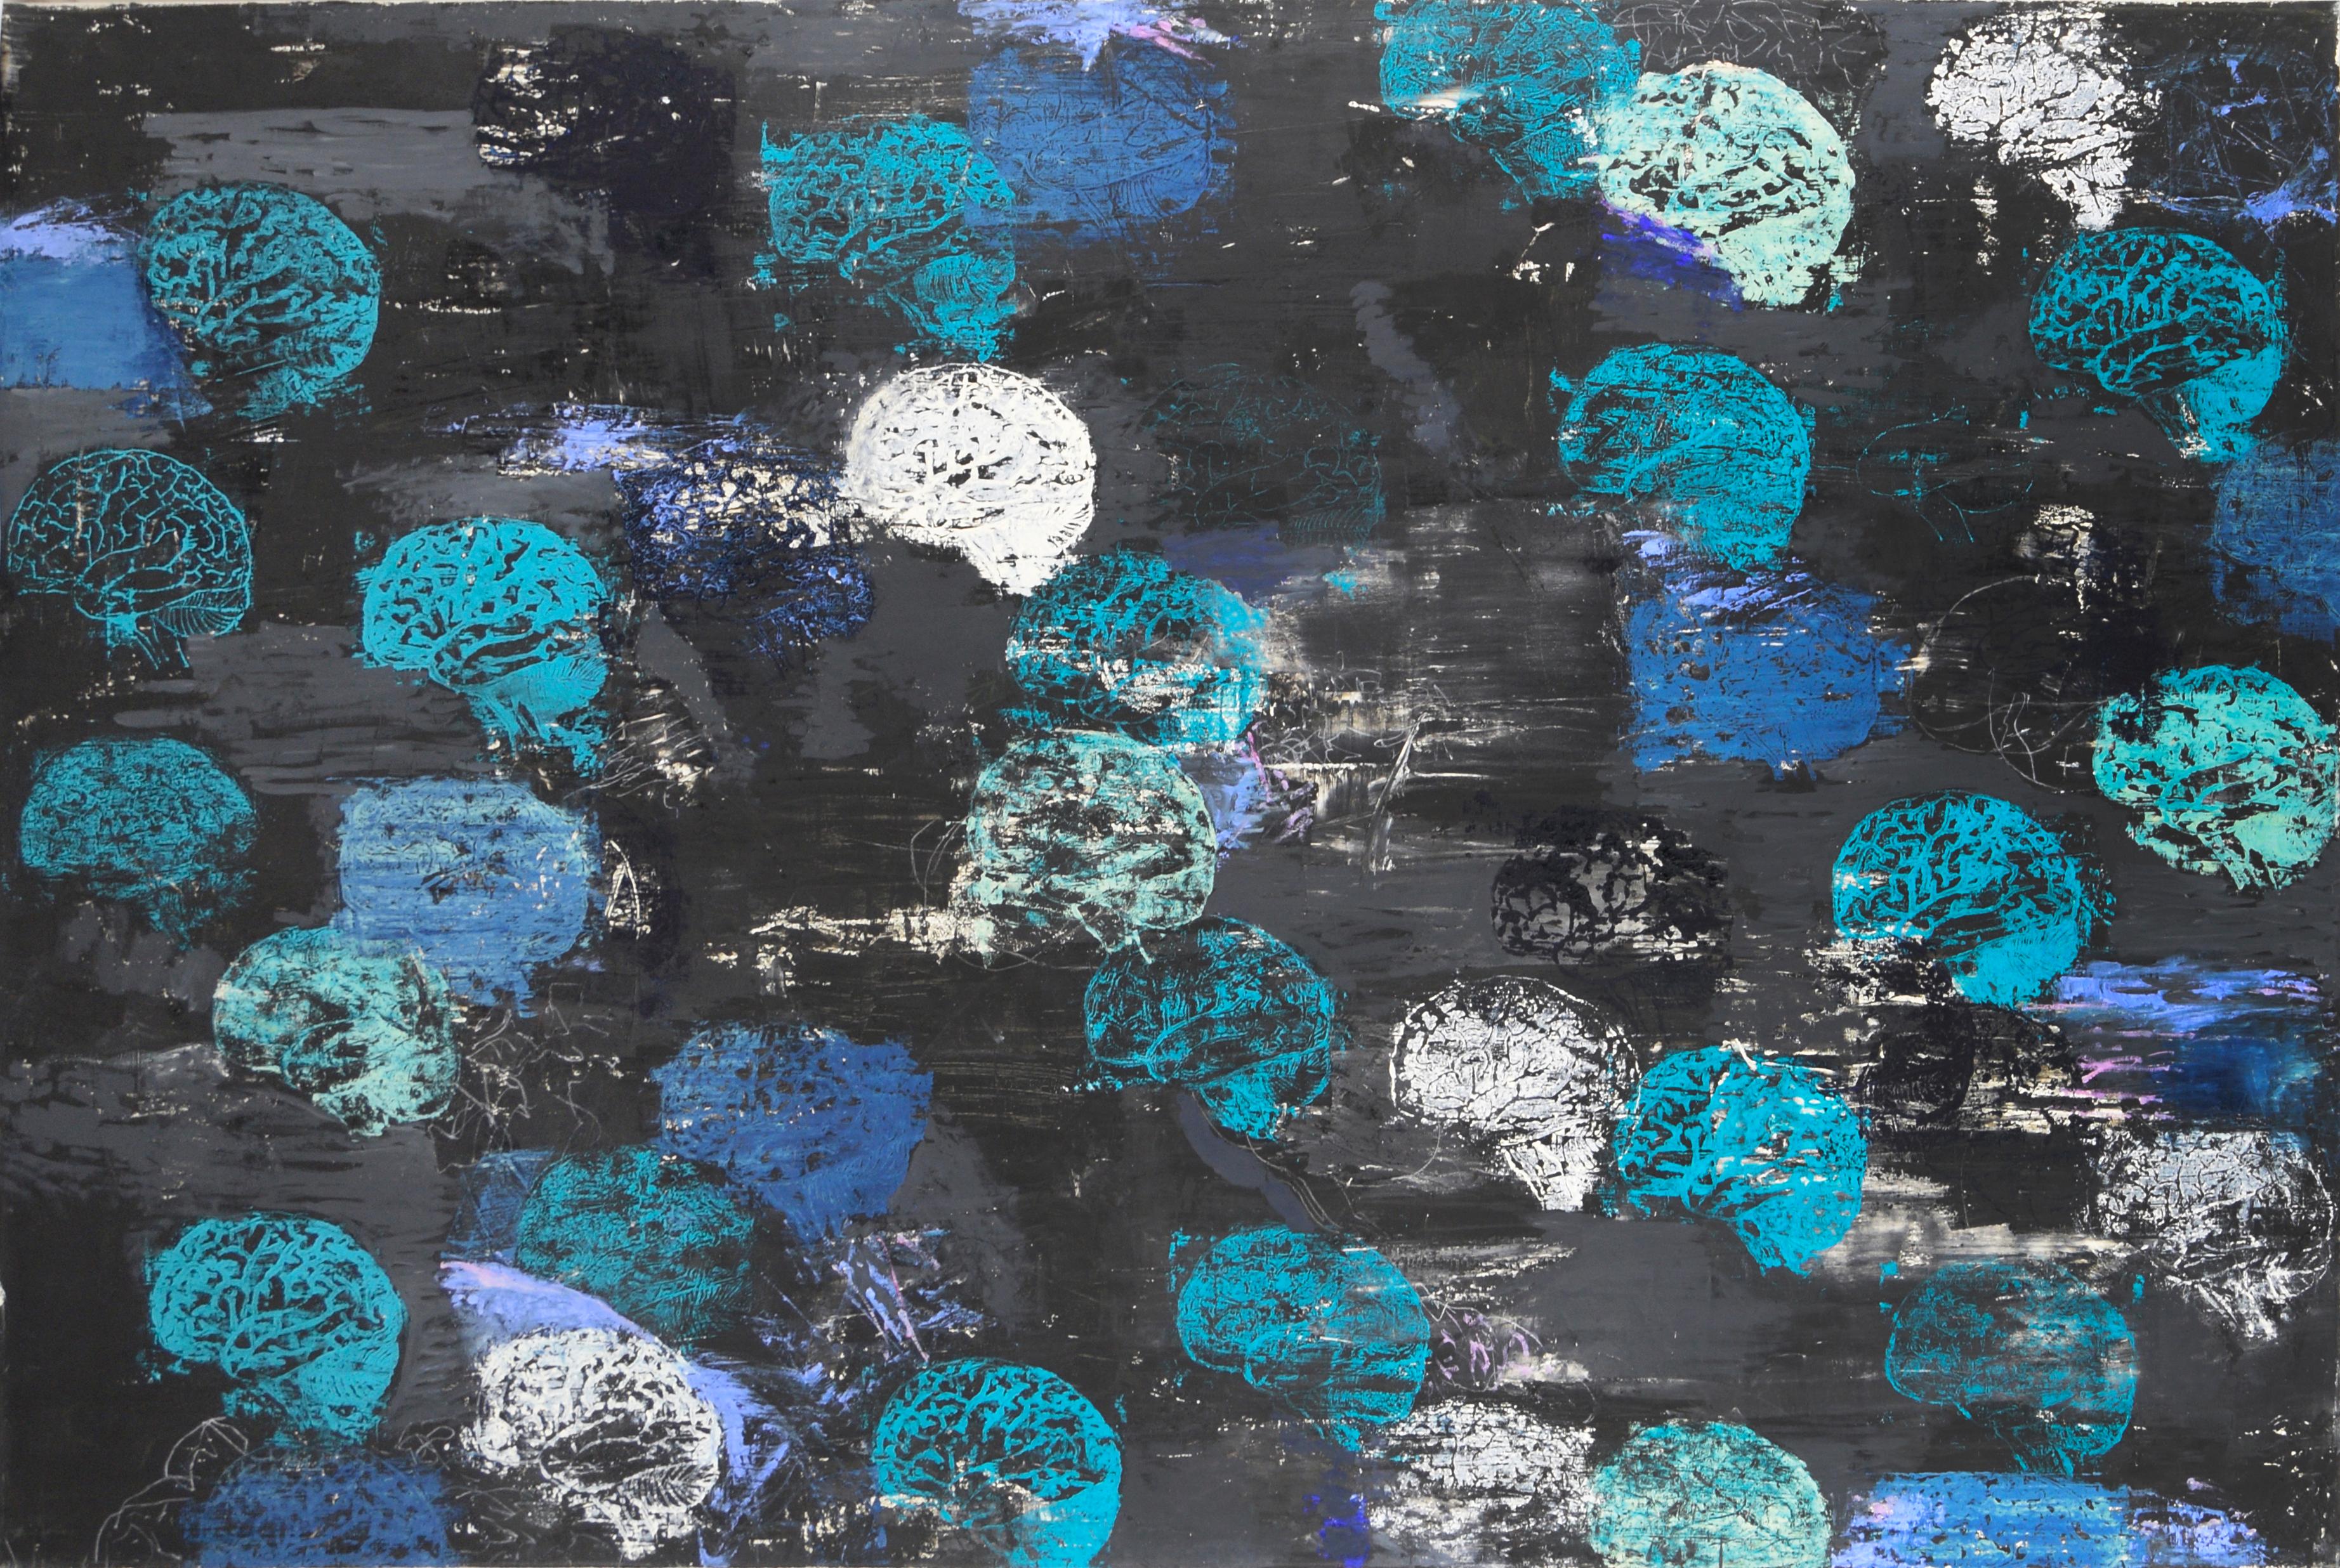 Brainiac VIII Abstract - Large Scale Abstract with Blue, White, & Black